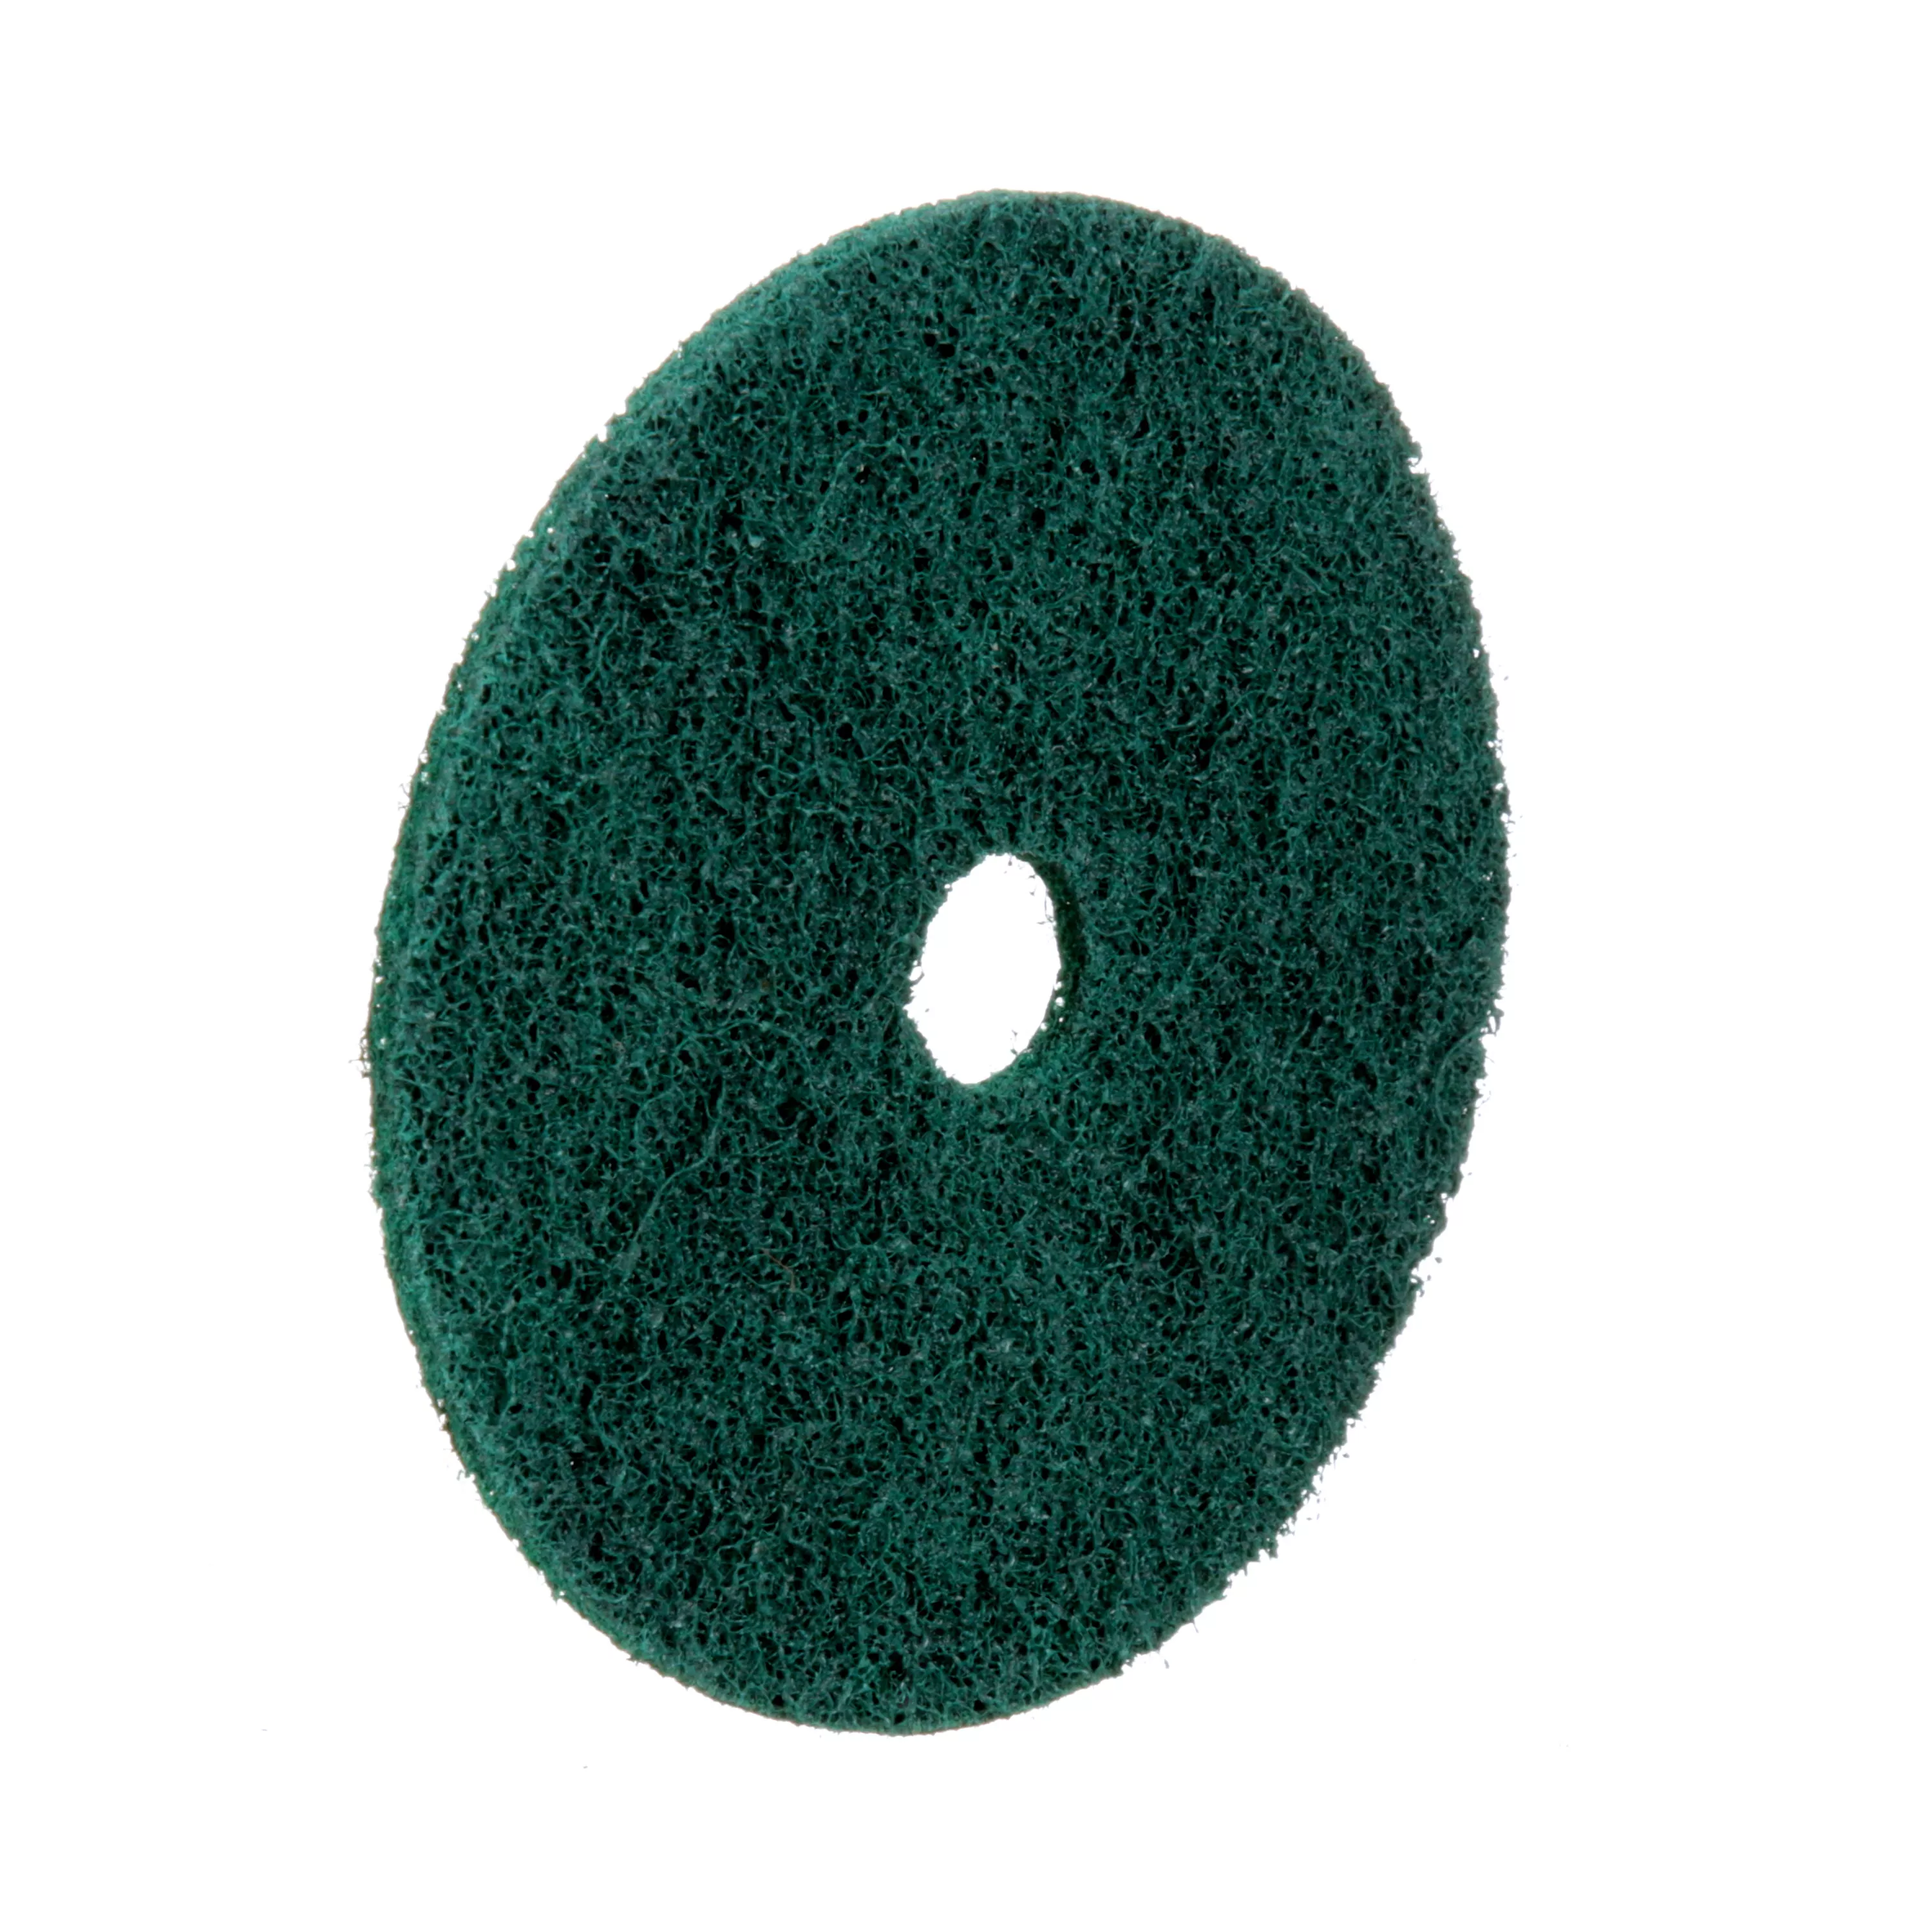 Product Number PN-DH | Scotch-Brite™ Precision Surface Conditioning Disc